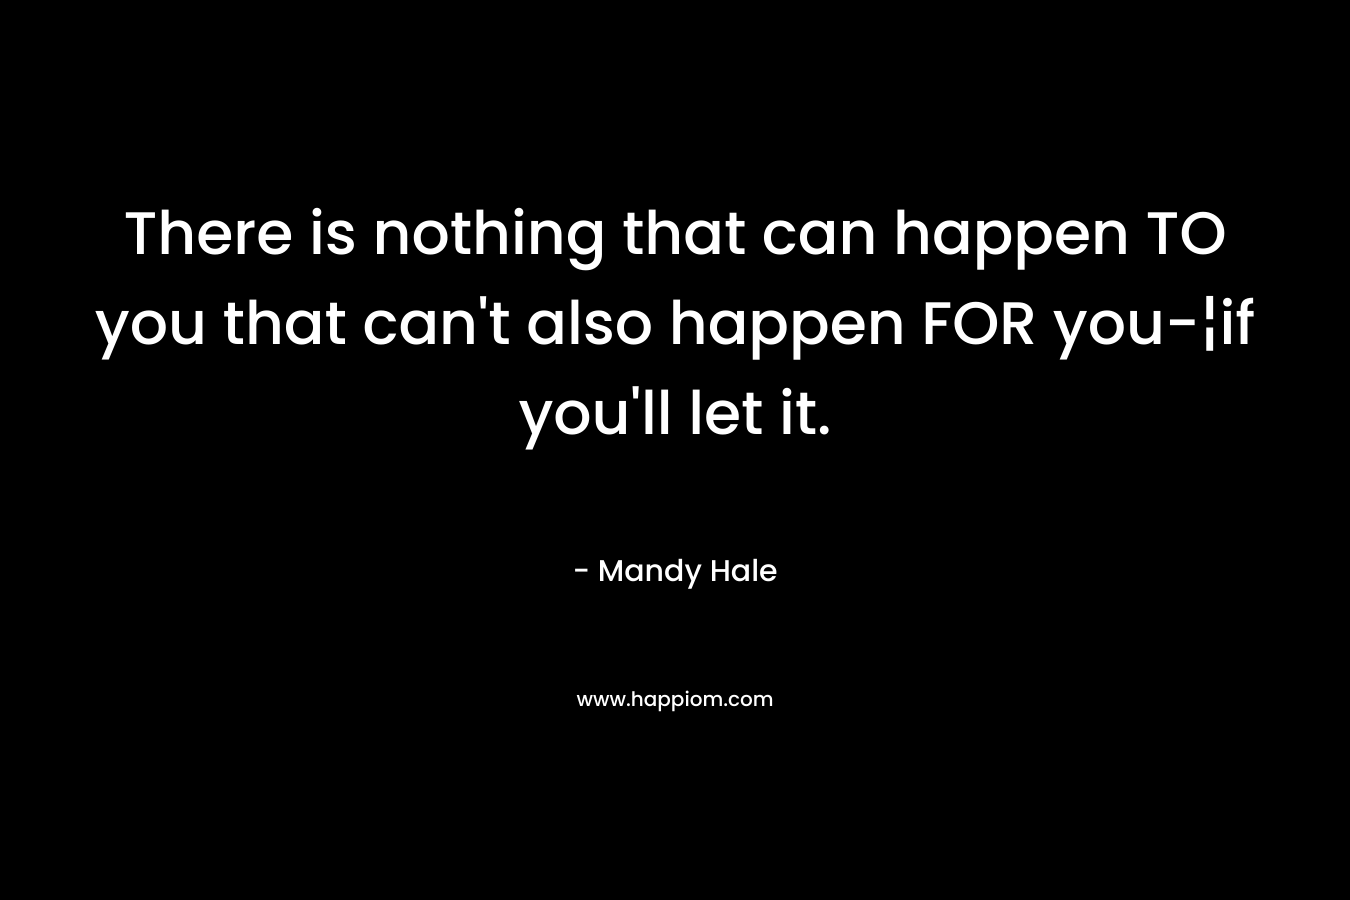 There is nothing that can happen TO you that can’t also happen FOR you-¦if you’ll let it. – Mandy Hale